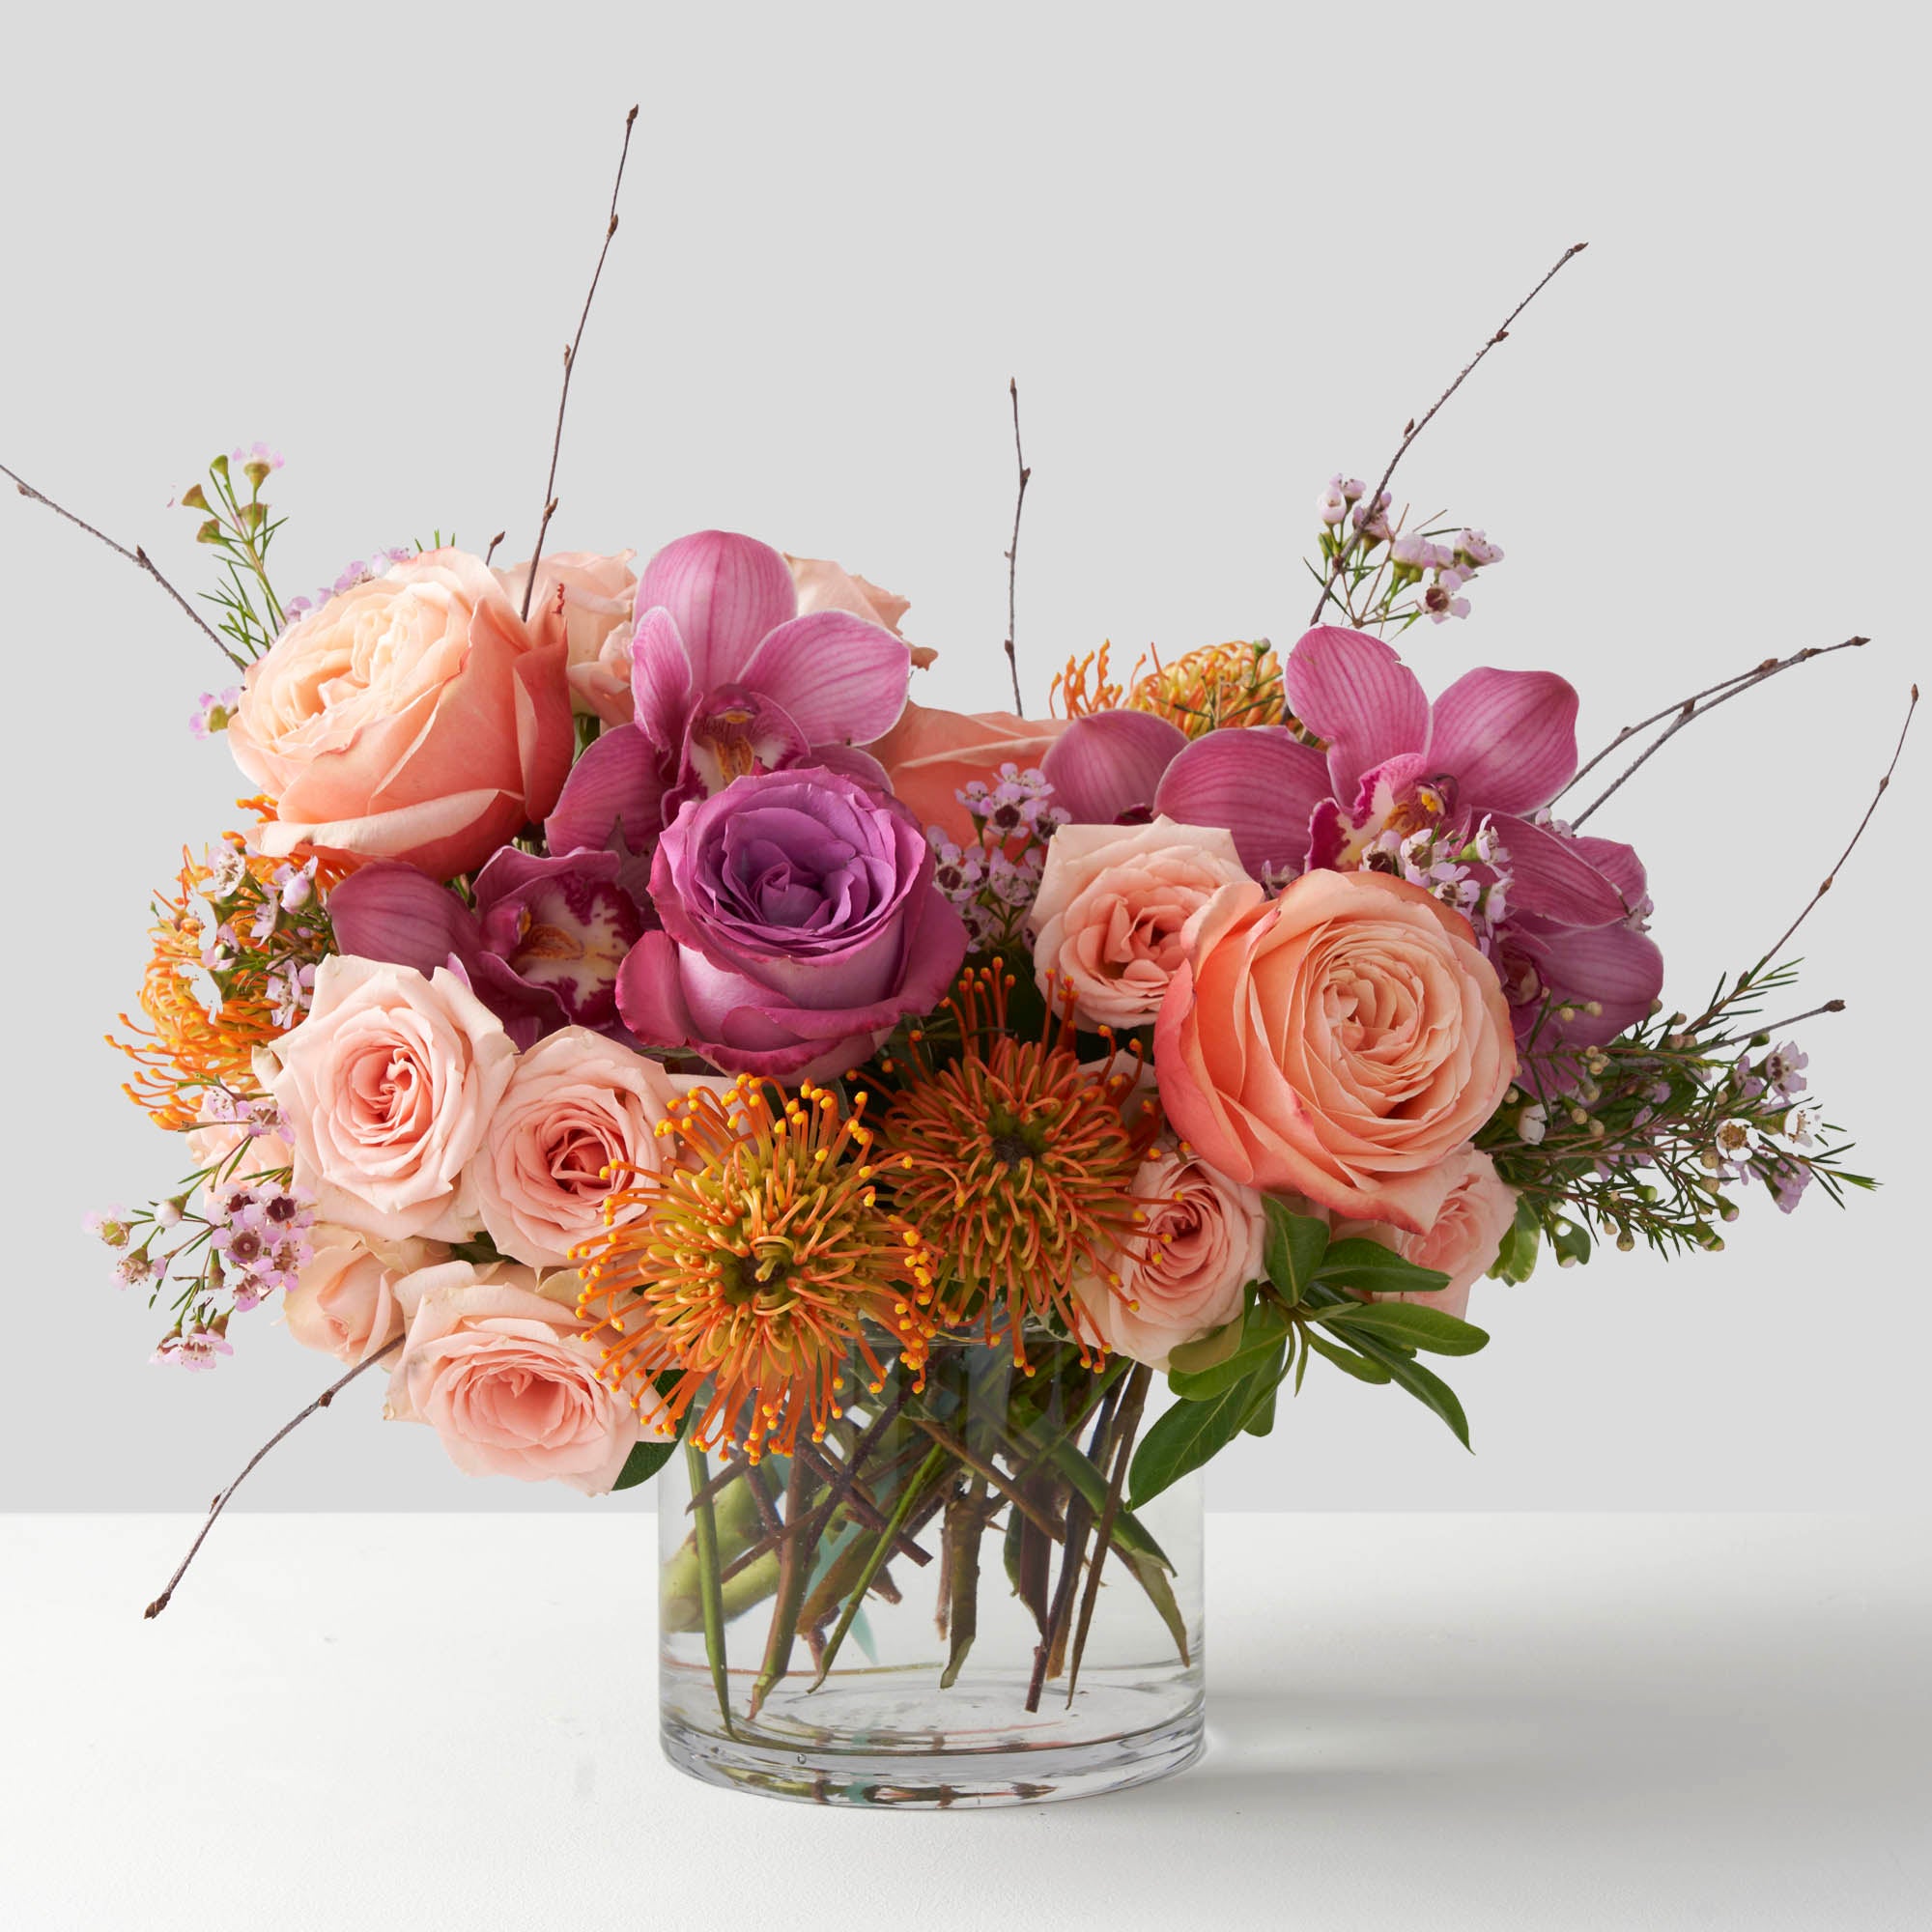 Roses, cybidium orchid, and protea arranged in a glass vase on white background